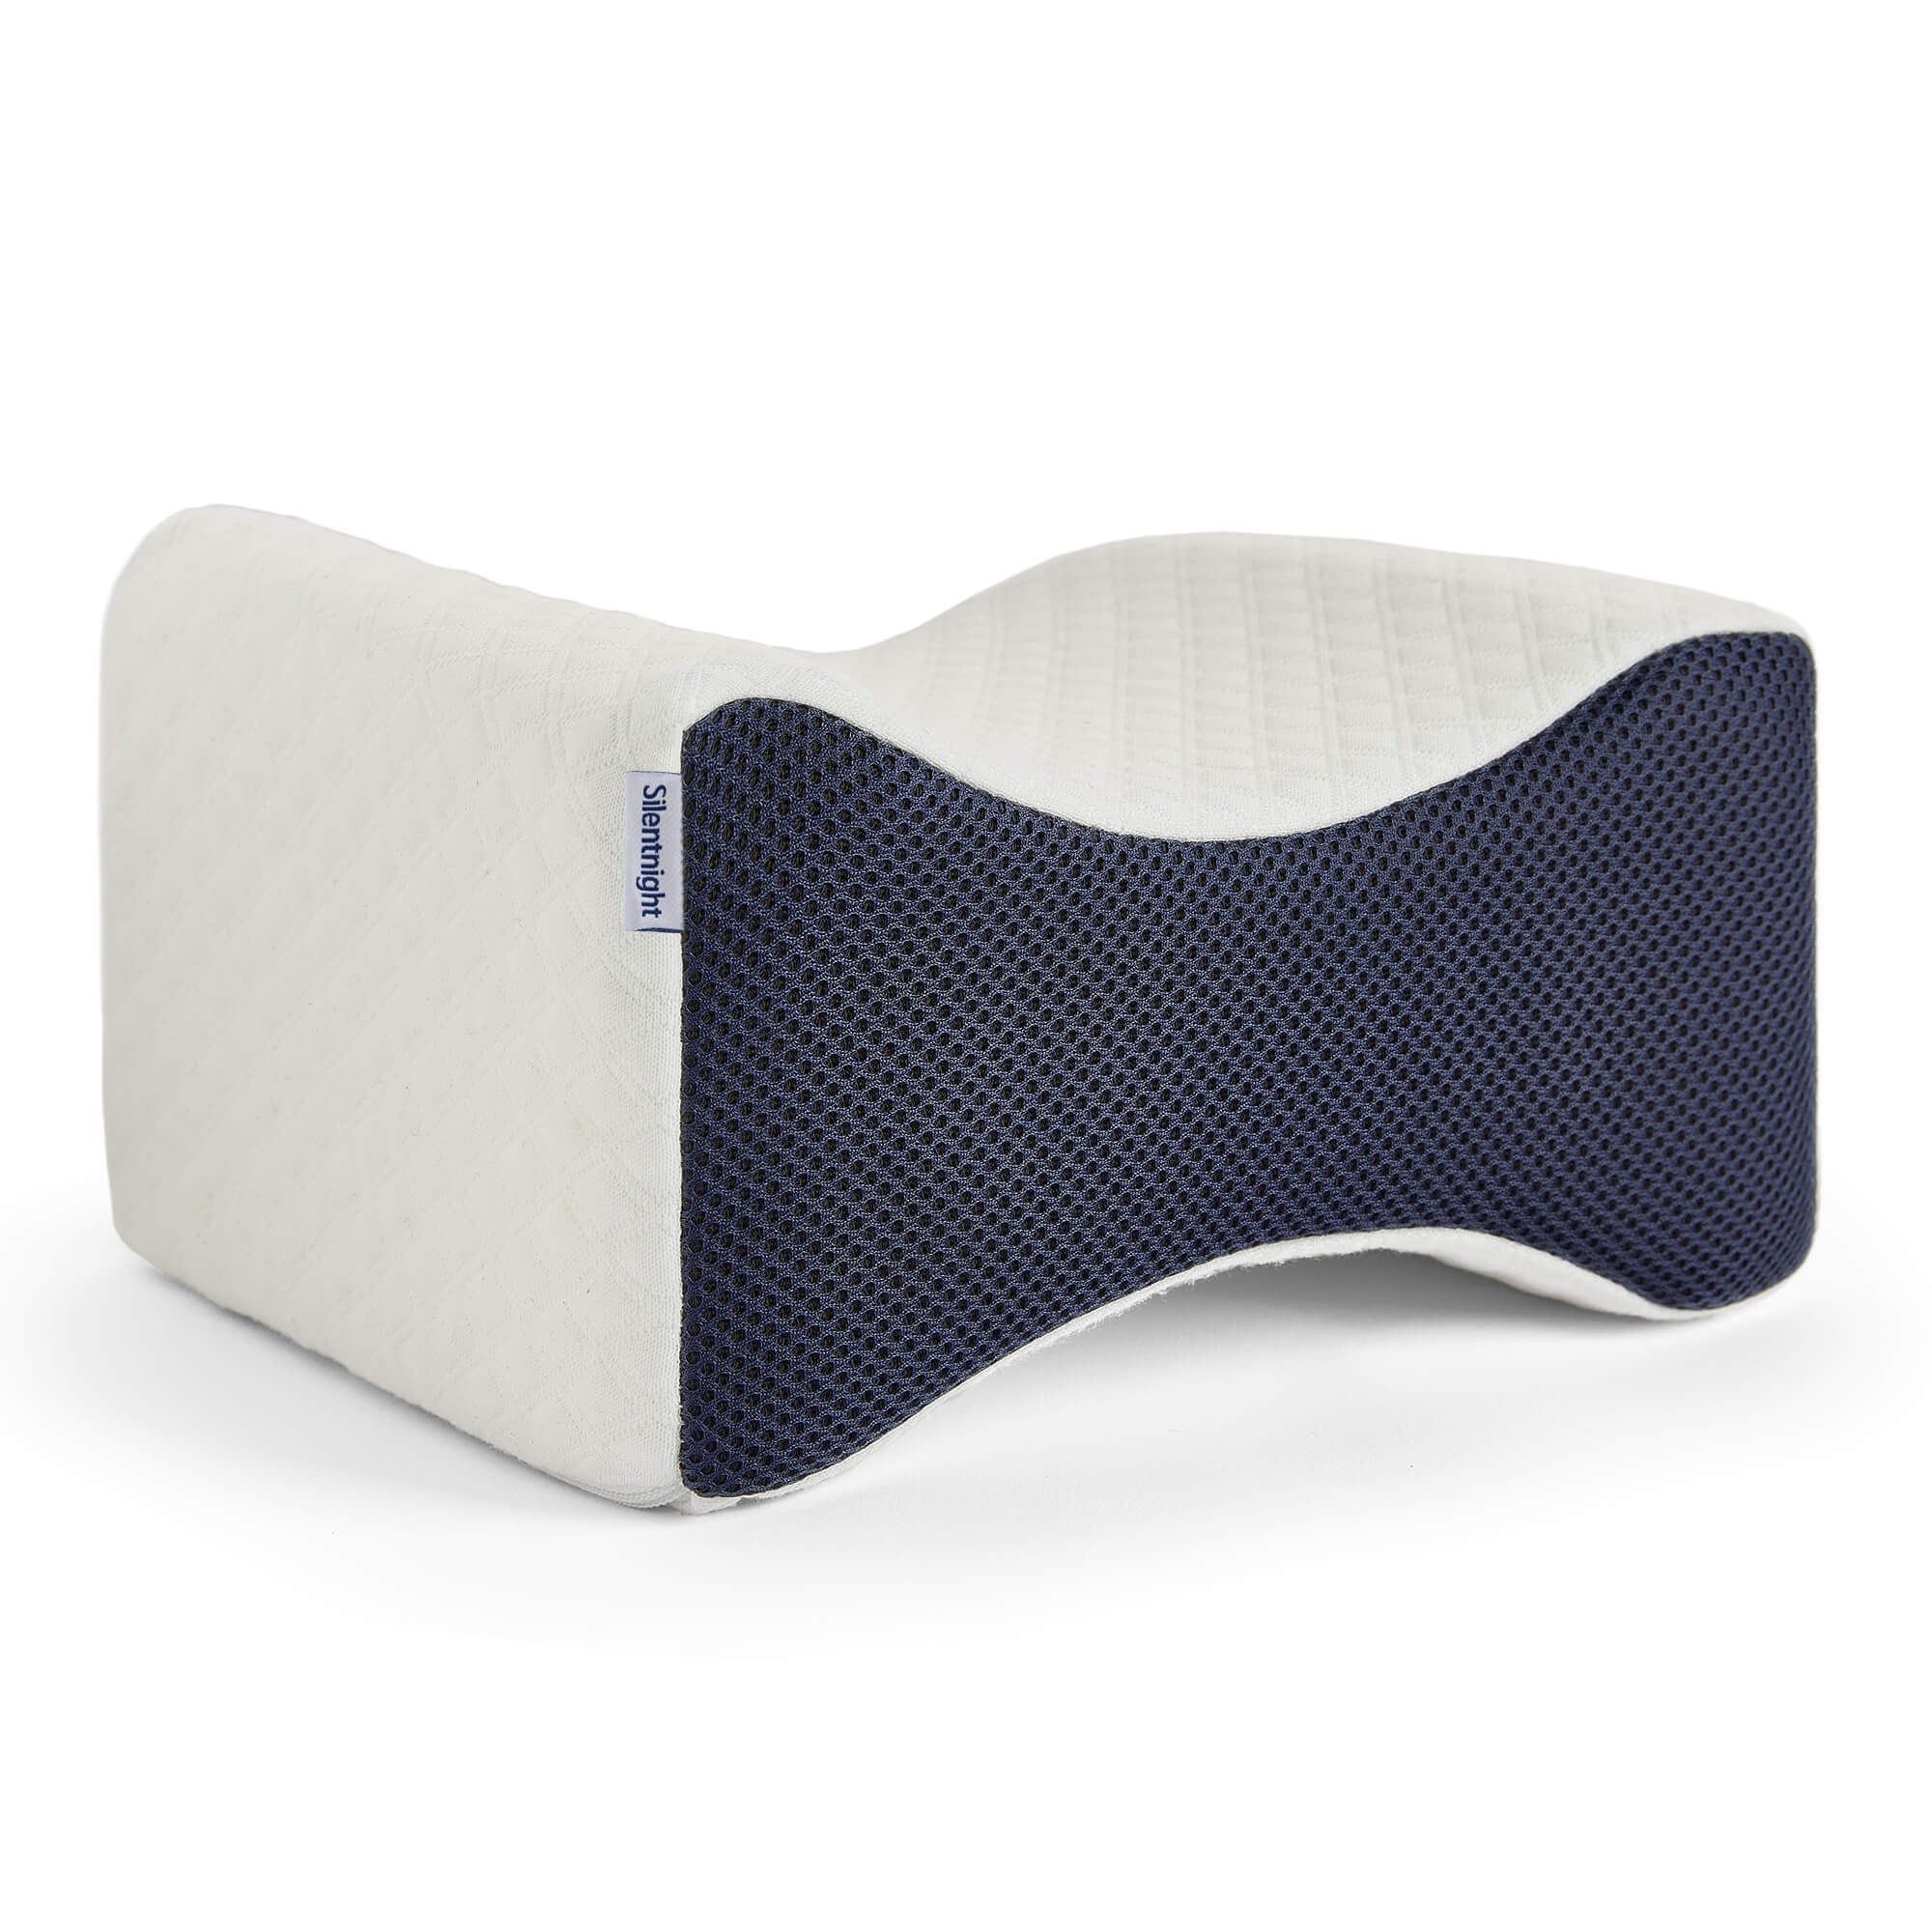 Silentnight Sleep Therapy Hip & Knee Support Pillow